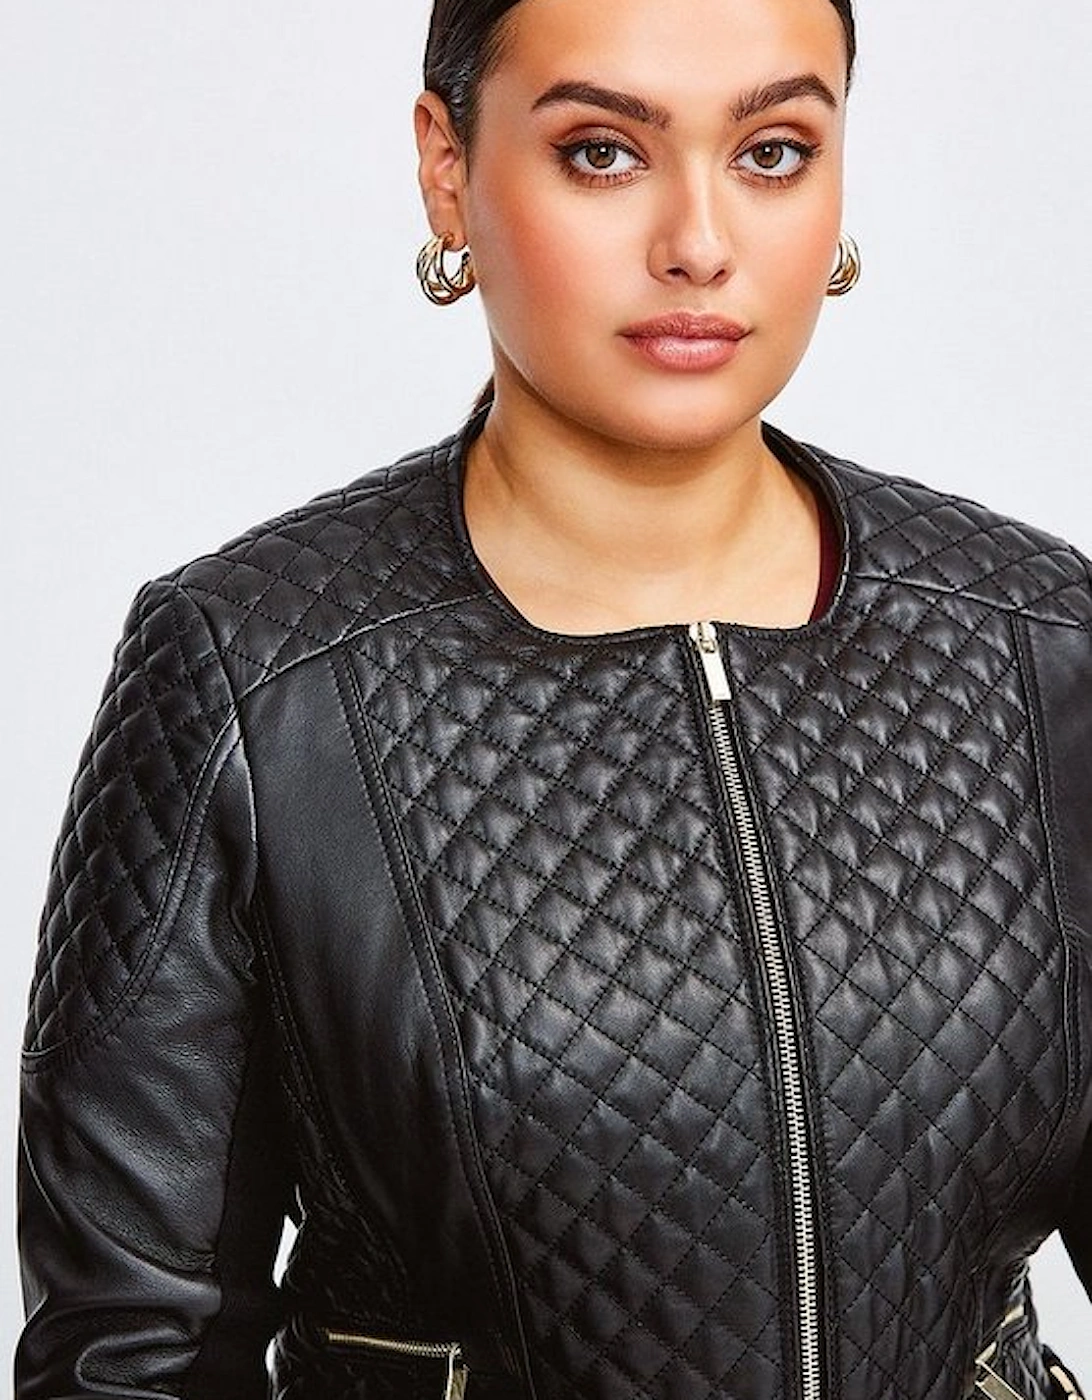 Plus Size Leather Quilted Jacket